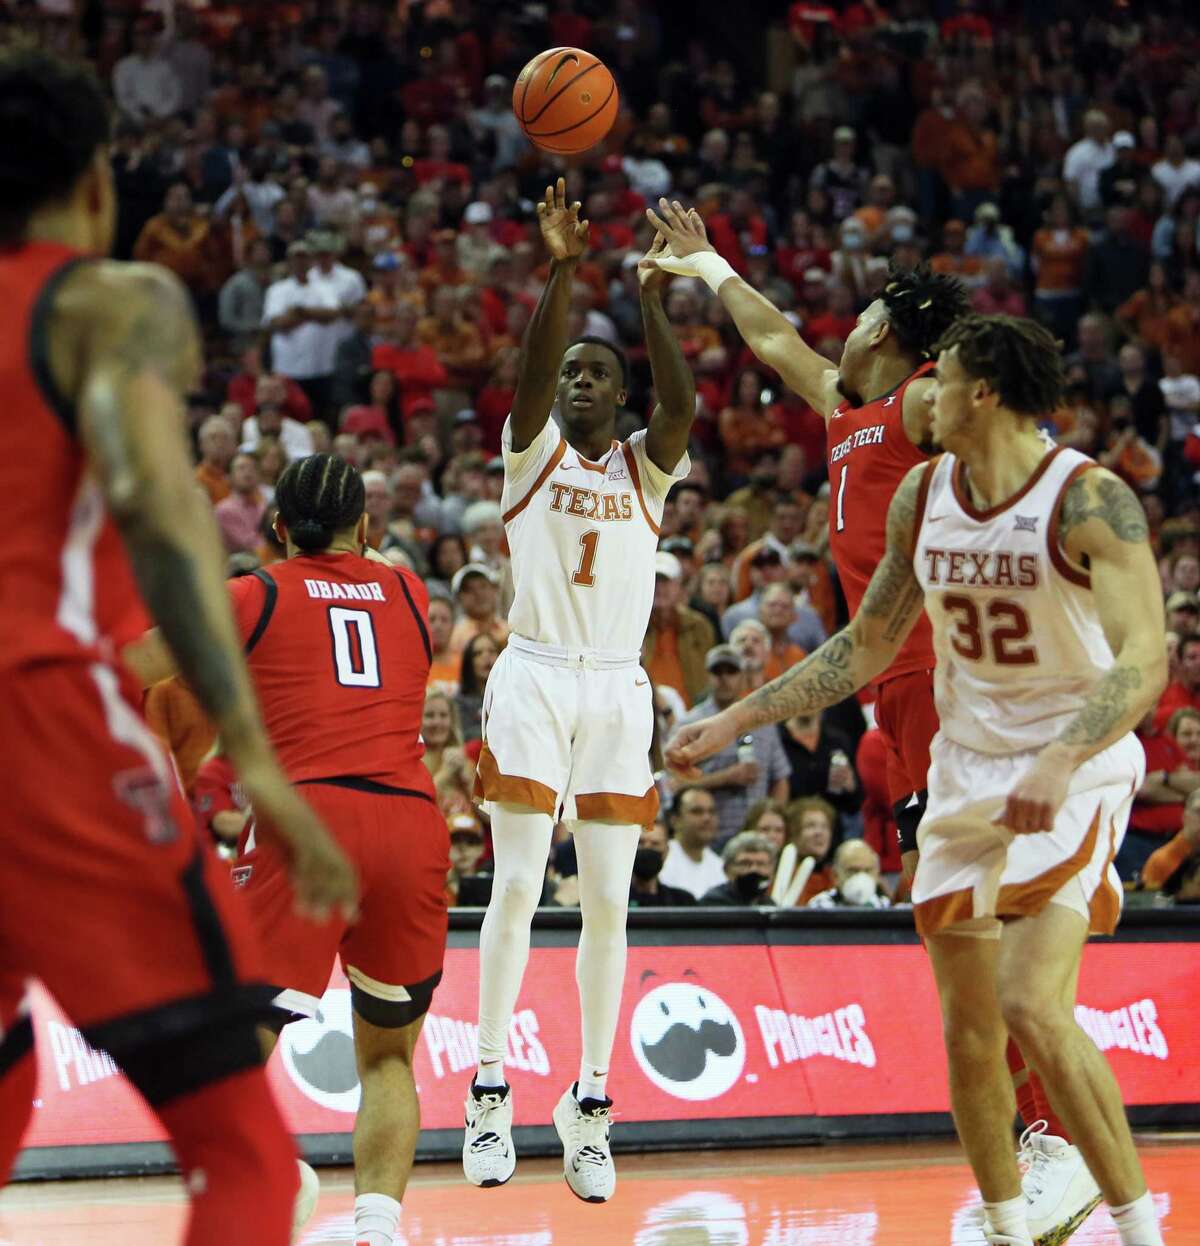 UT guard Andrew Jones shoots against Texas Tech on Saturday. Jones finished with a game-high 20 points for the Longhorns.